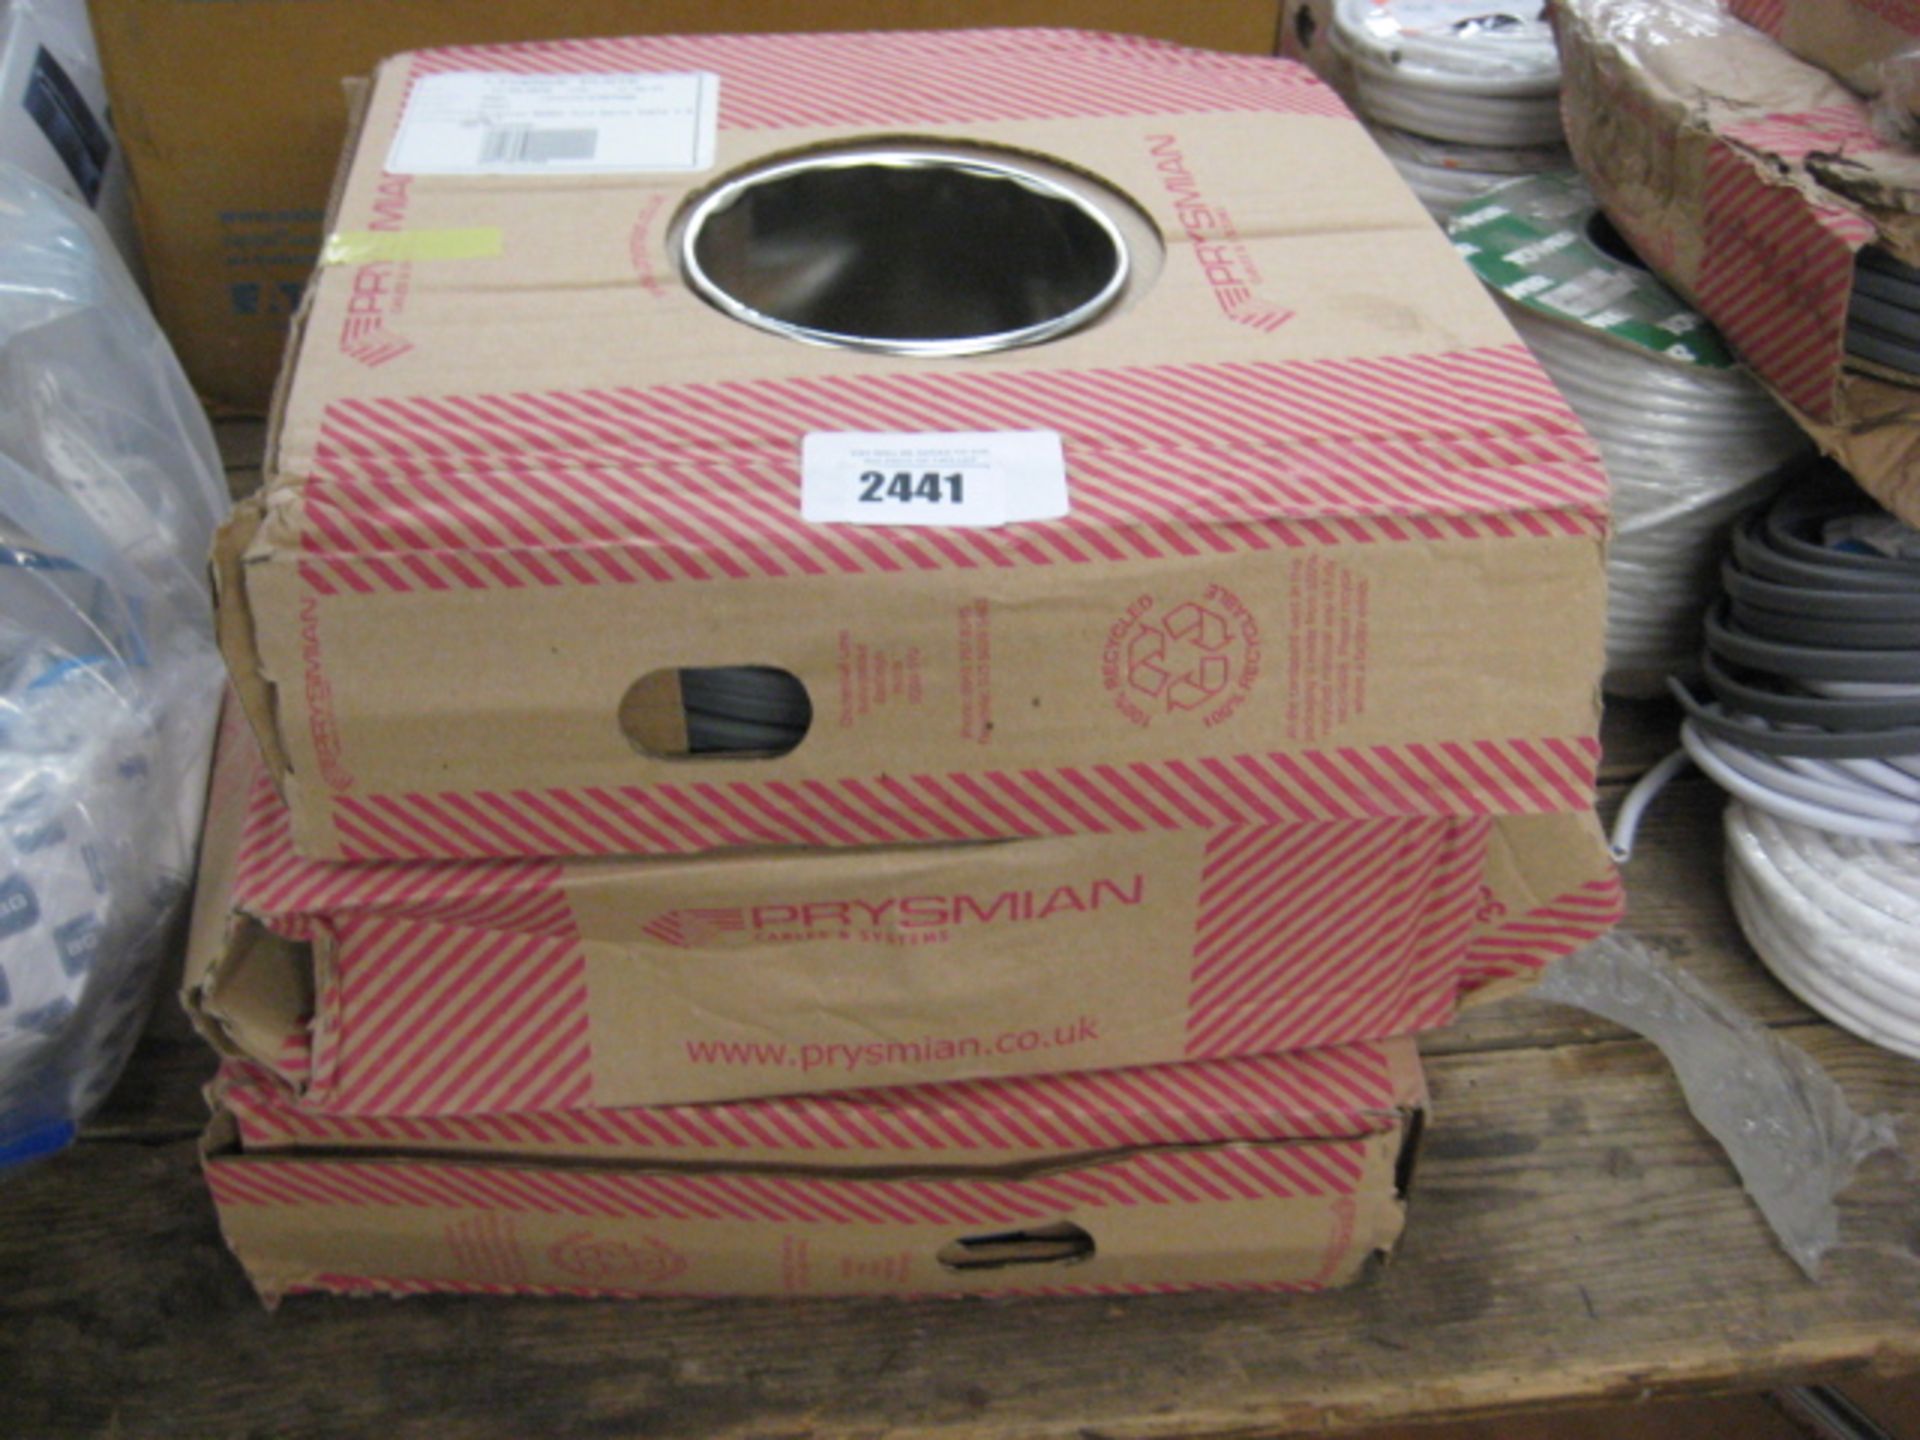 3 rolls of Prysmian twin earth cable